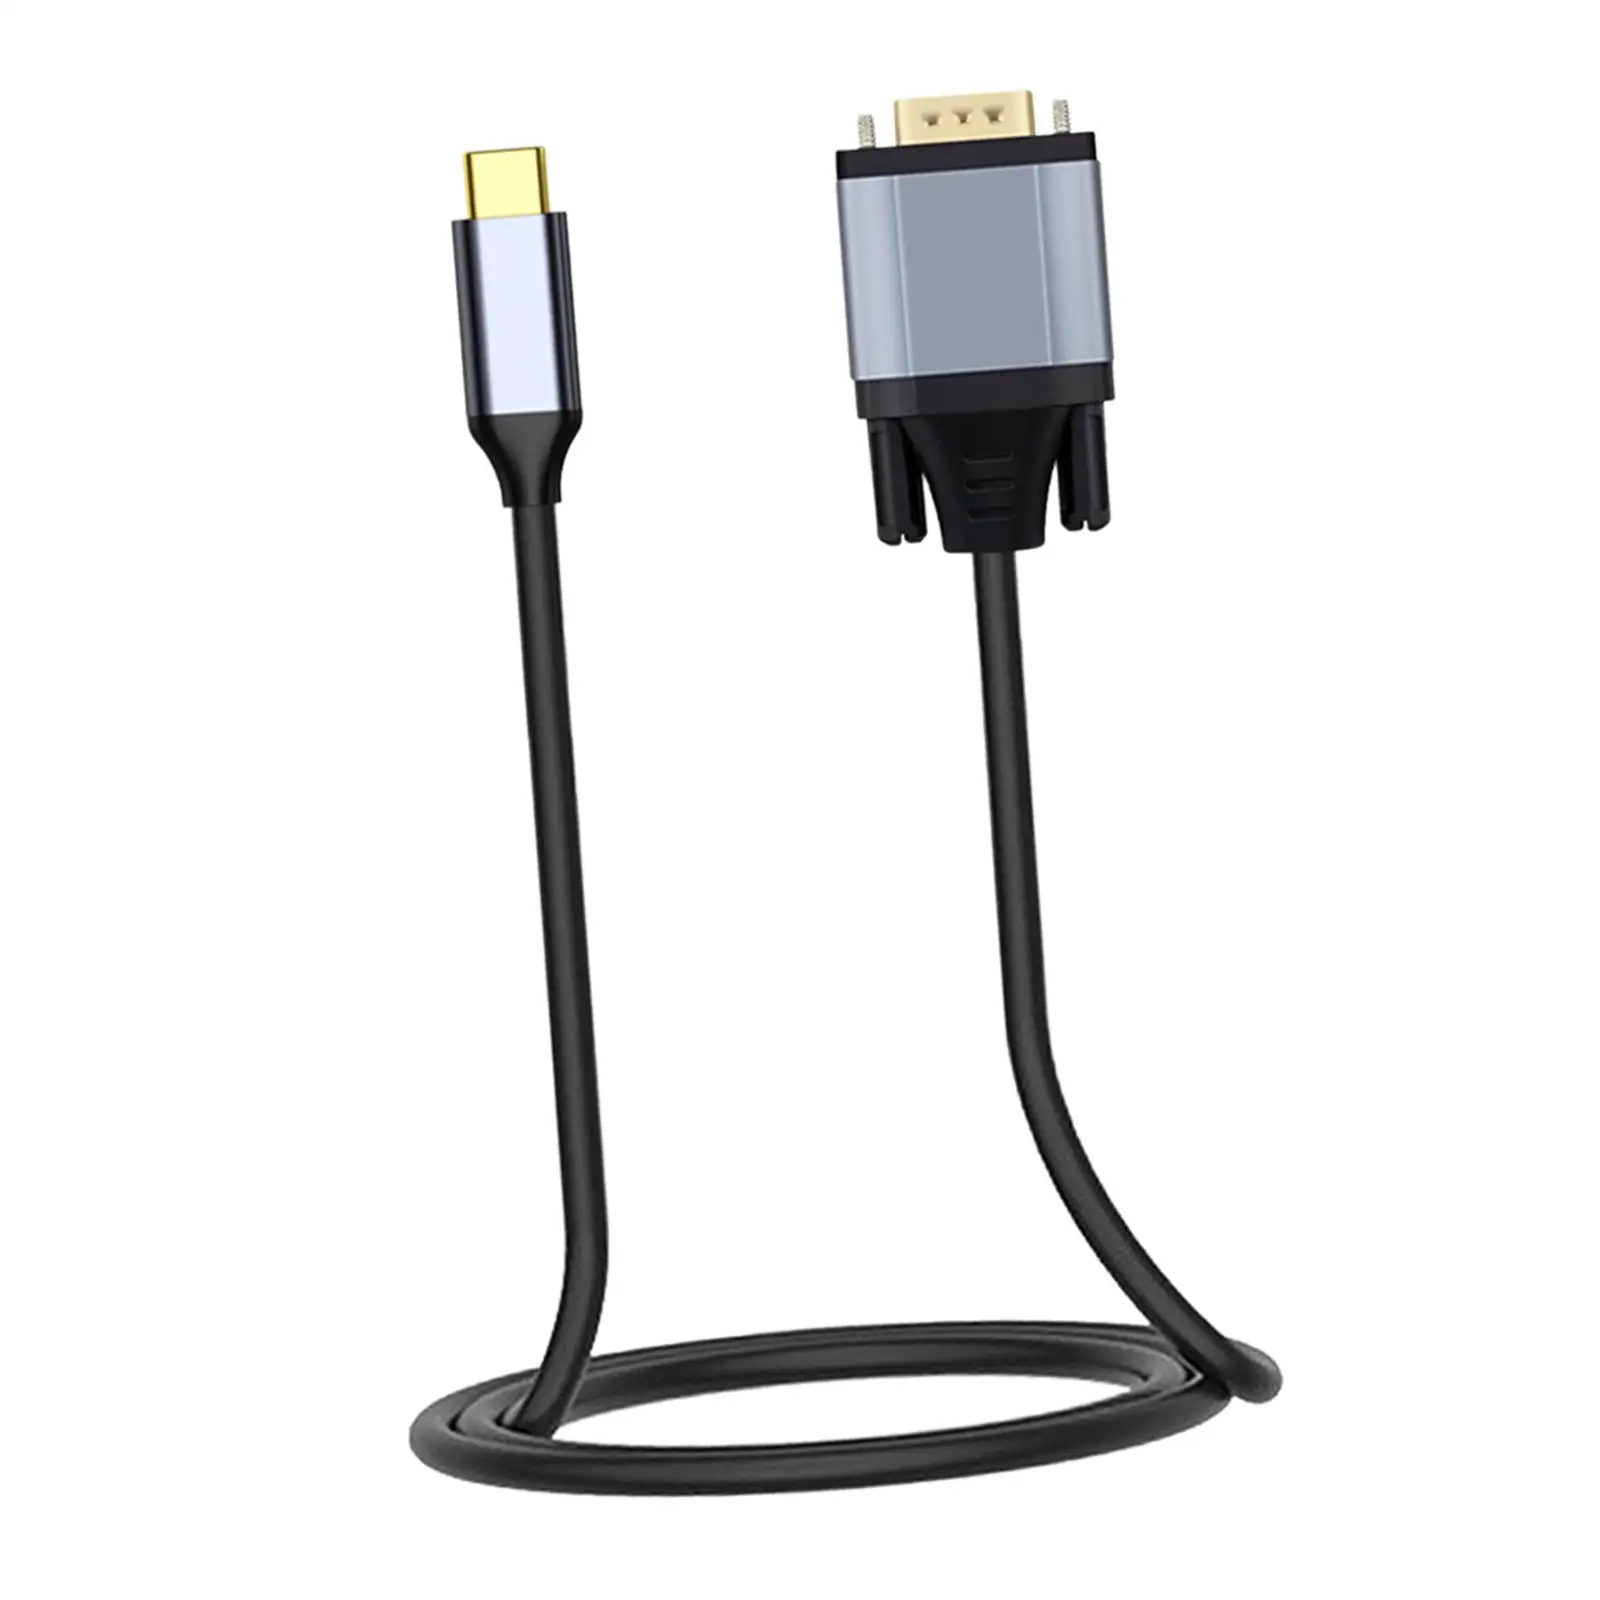 USB3.1 Type C to VGA Adapter Cable 1.8 Plug and Gbps ,Durable 1080P ,Converter for Projector, Screen Monitor